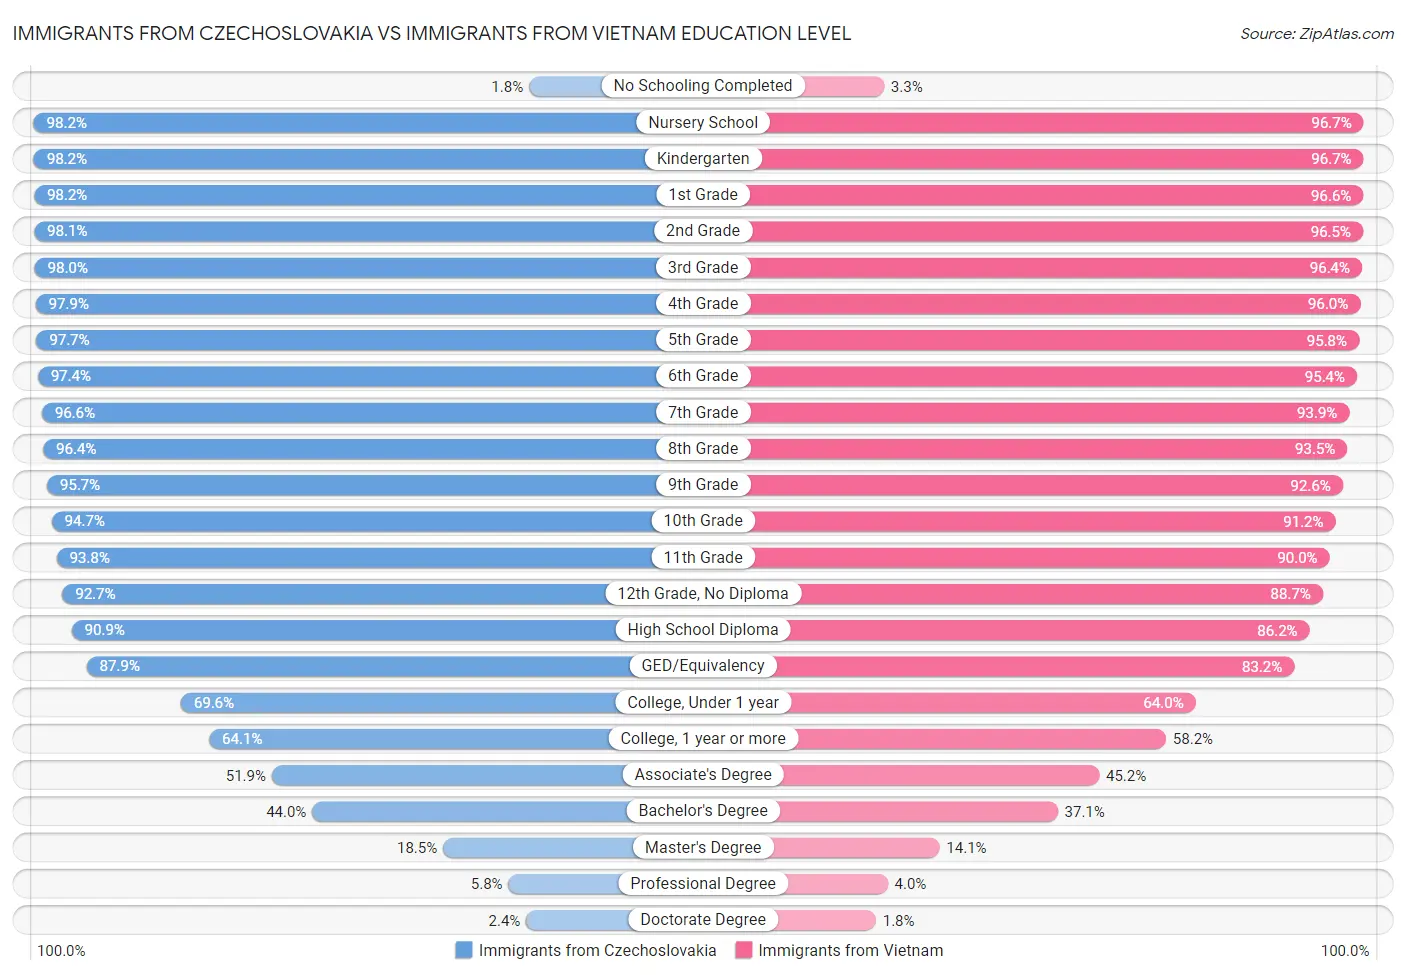 Immigrants from Czechoslovakia vs Immigrants from Vietnam Education Level